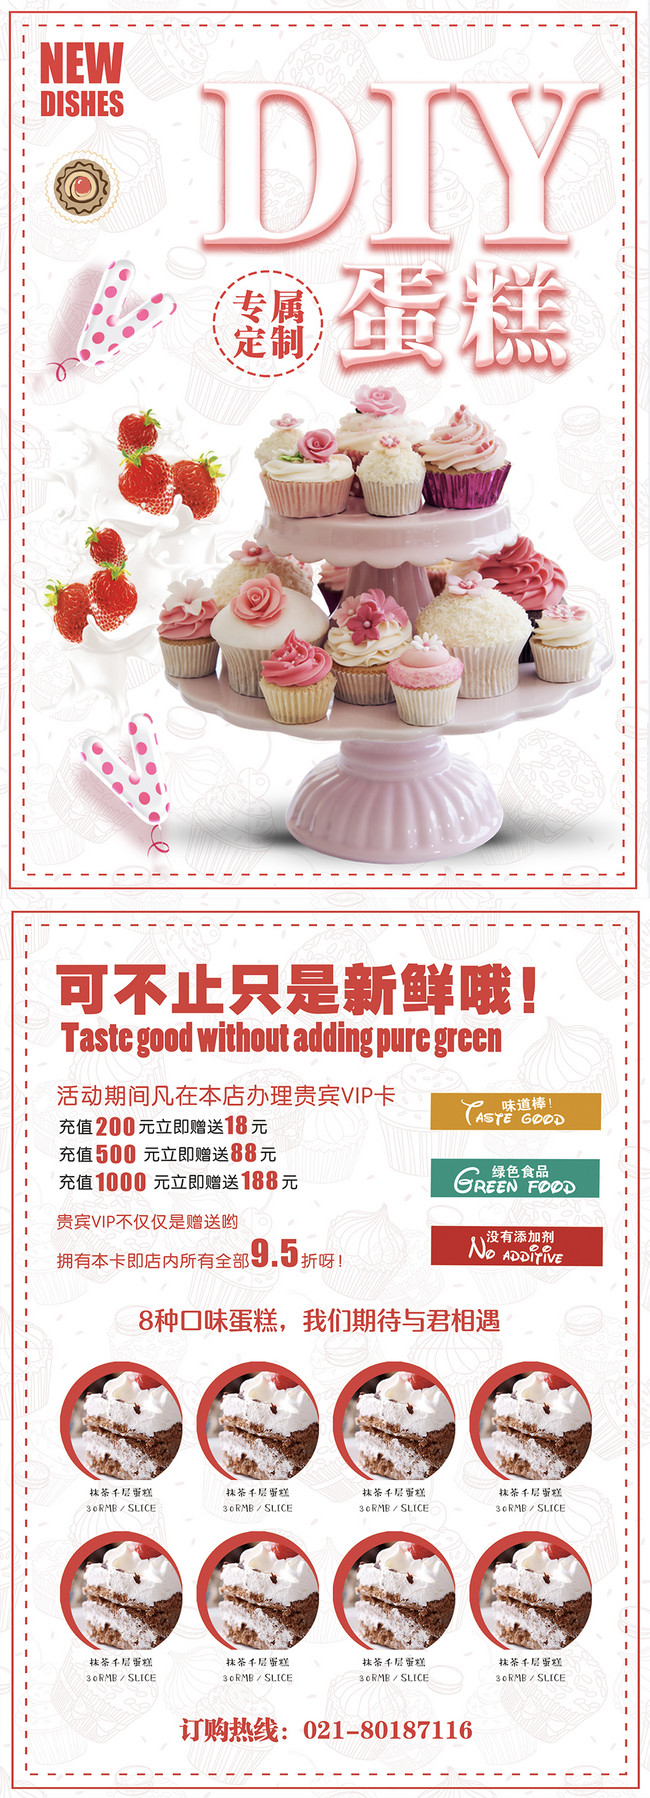 Diy cake promotion flyer template image_picture free download Pertaining To Cake Flyer Template Free